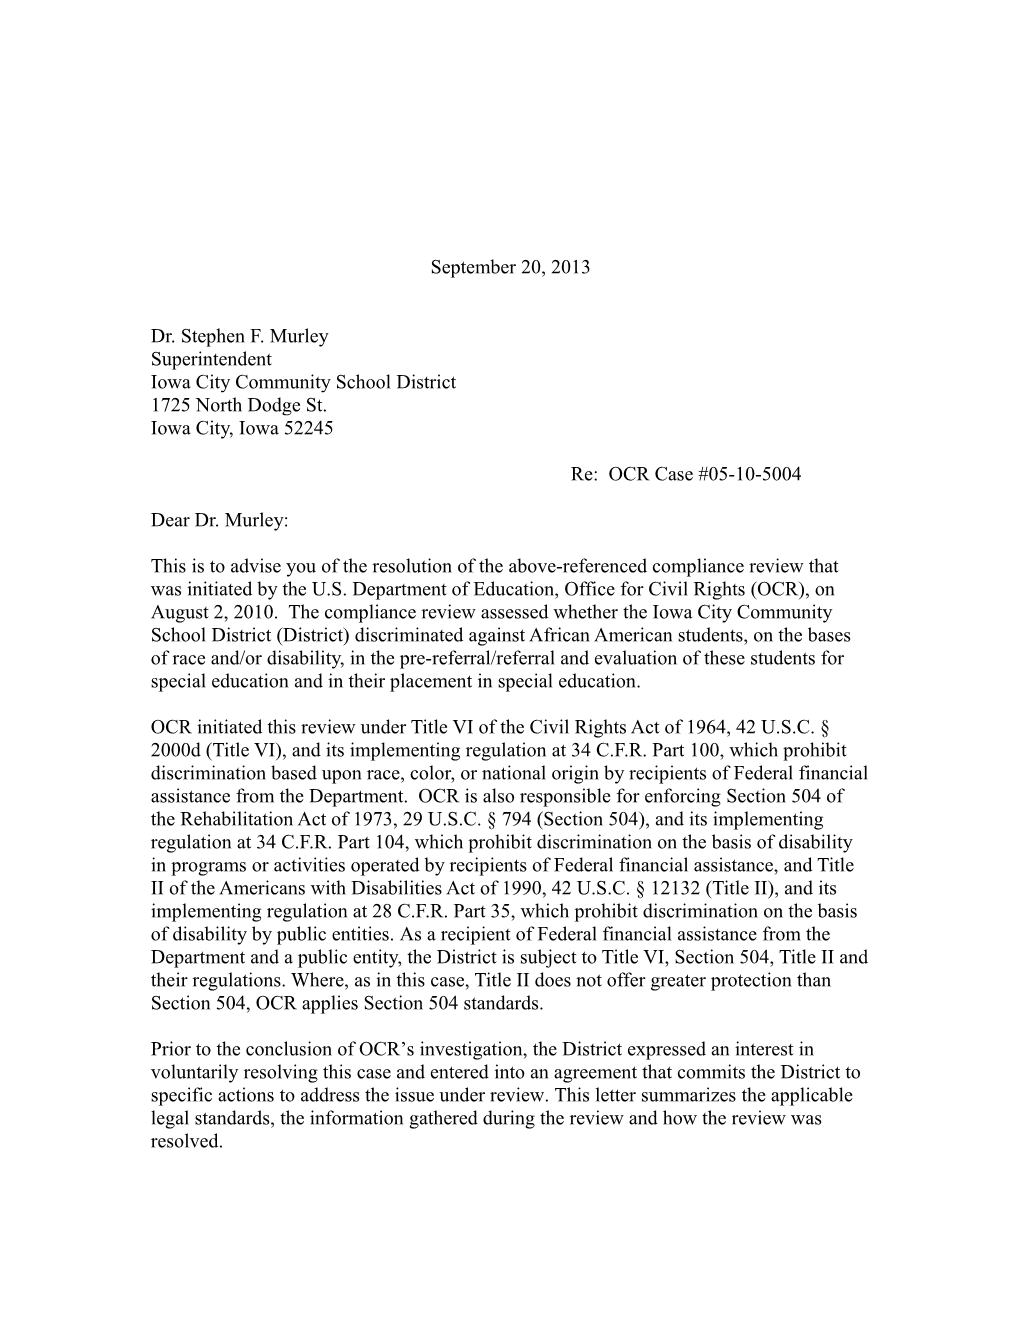 Resolution Letter to Iowa City, Iowa: Compliance Review #05-10-5004 September 20, 2013 (MS Word)